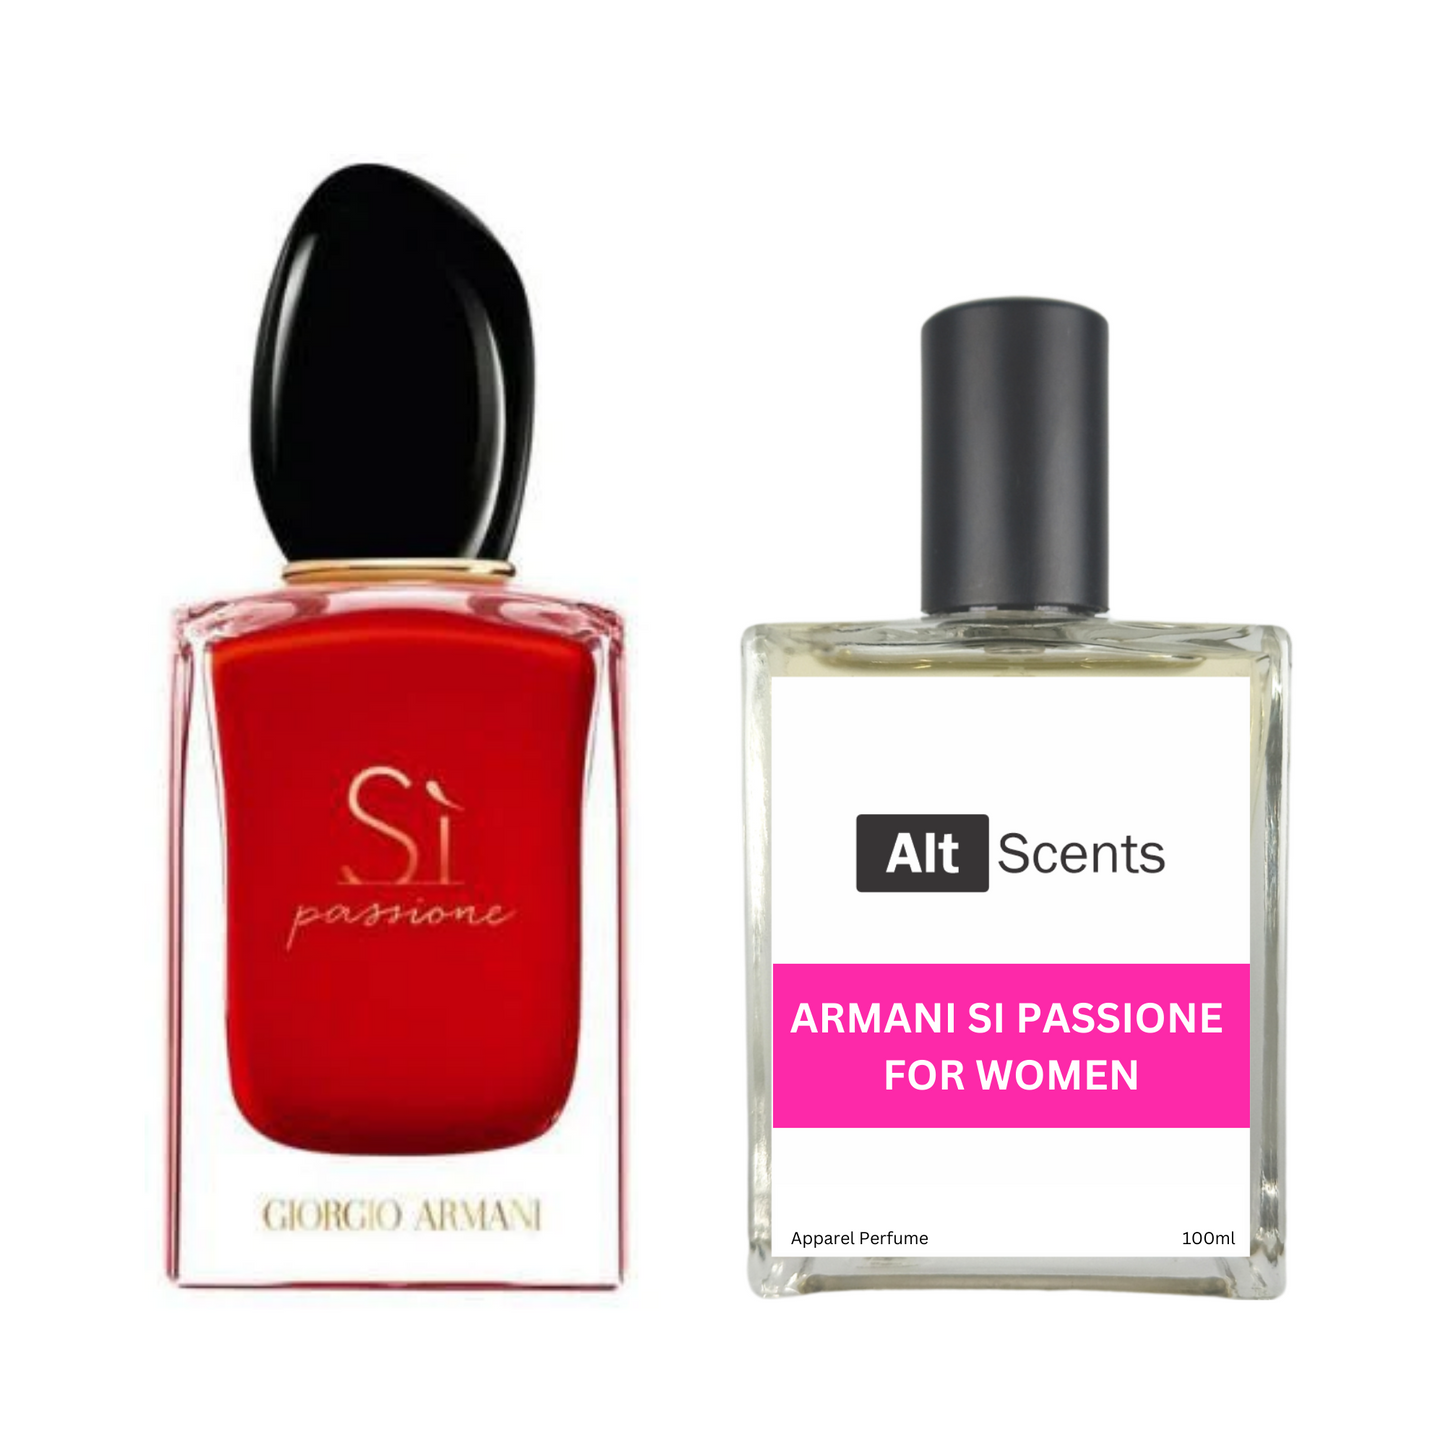 Armani SI Passione for Women type Perfume for Women